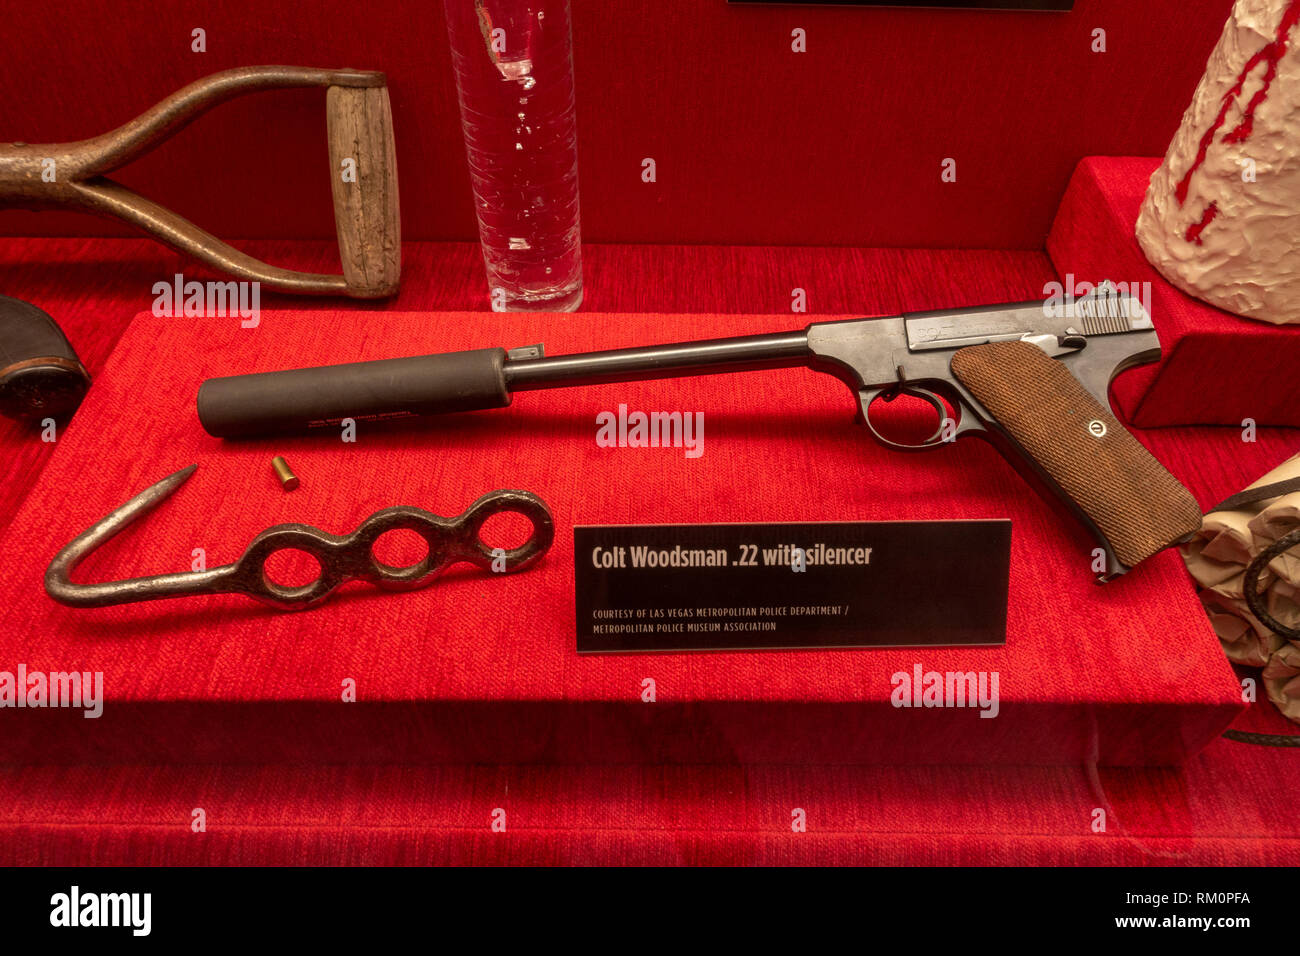 A Colt Woodsman .22 with silencer, The Mob Museum, Las Vegas (City of Las Vegas), Nevada, United States. Stock Photo